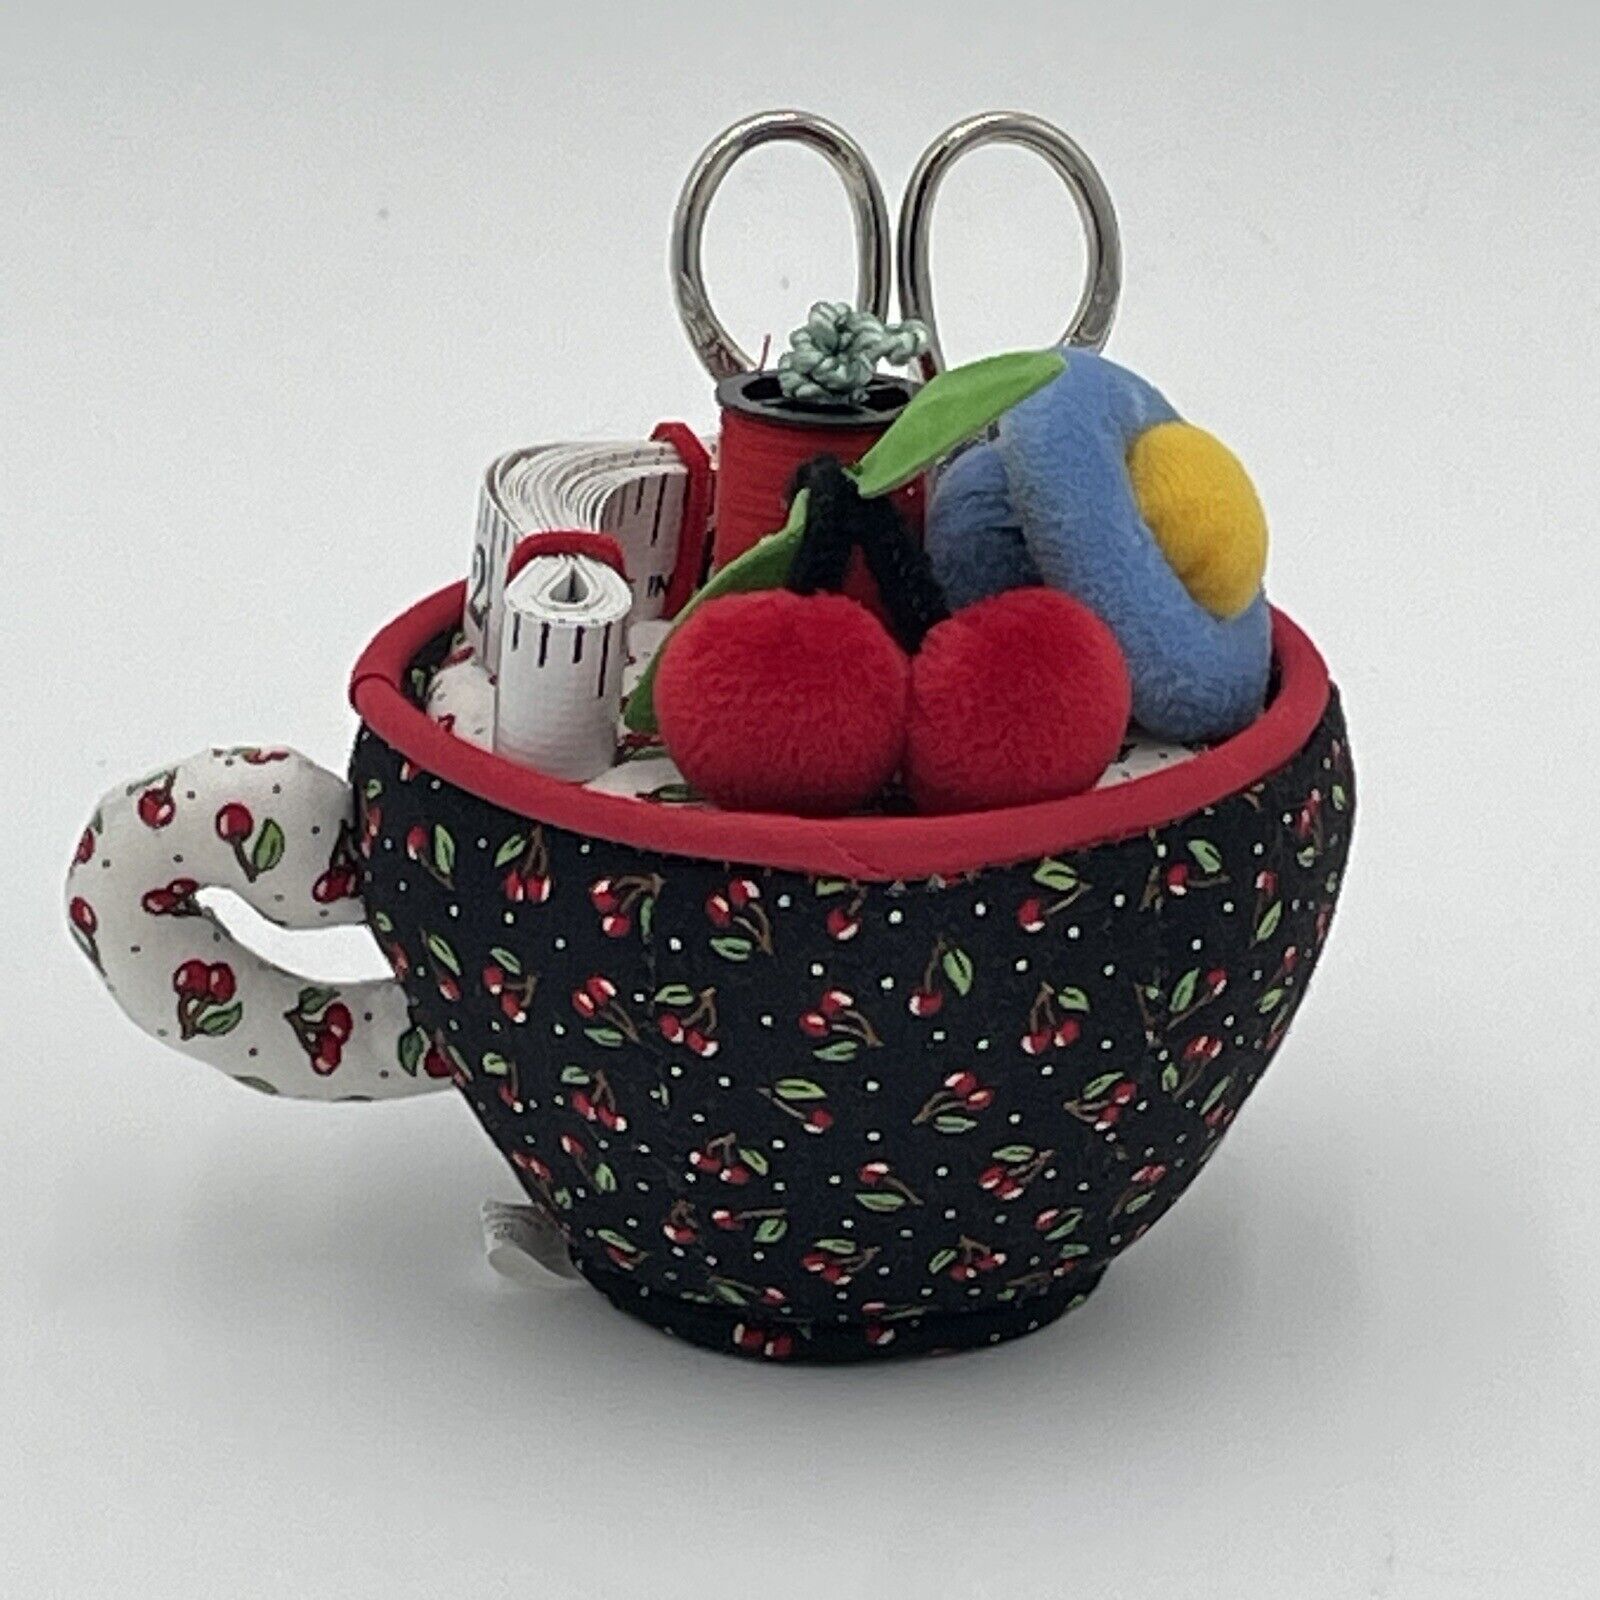 Mary Engelbreit Fabric Pincushion TEA CUP Sewing Notions Collectible Cherries